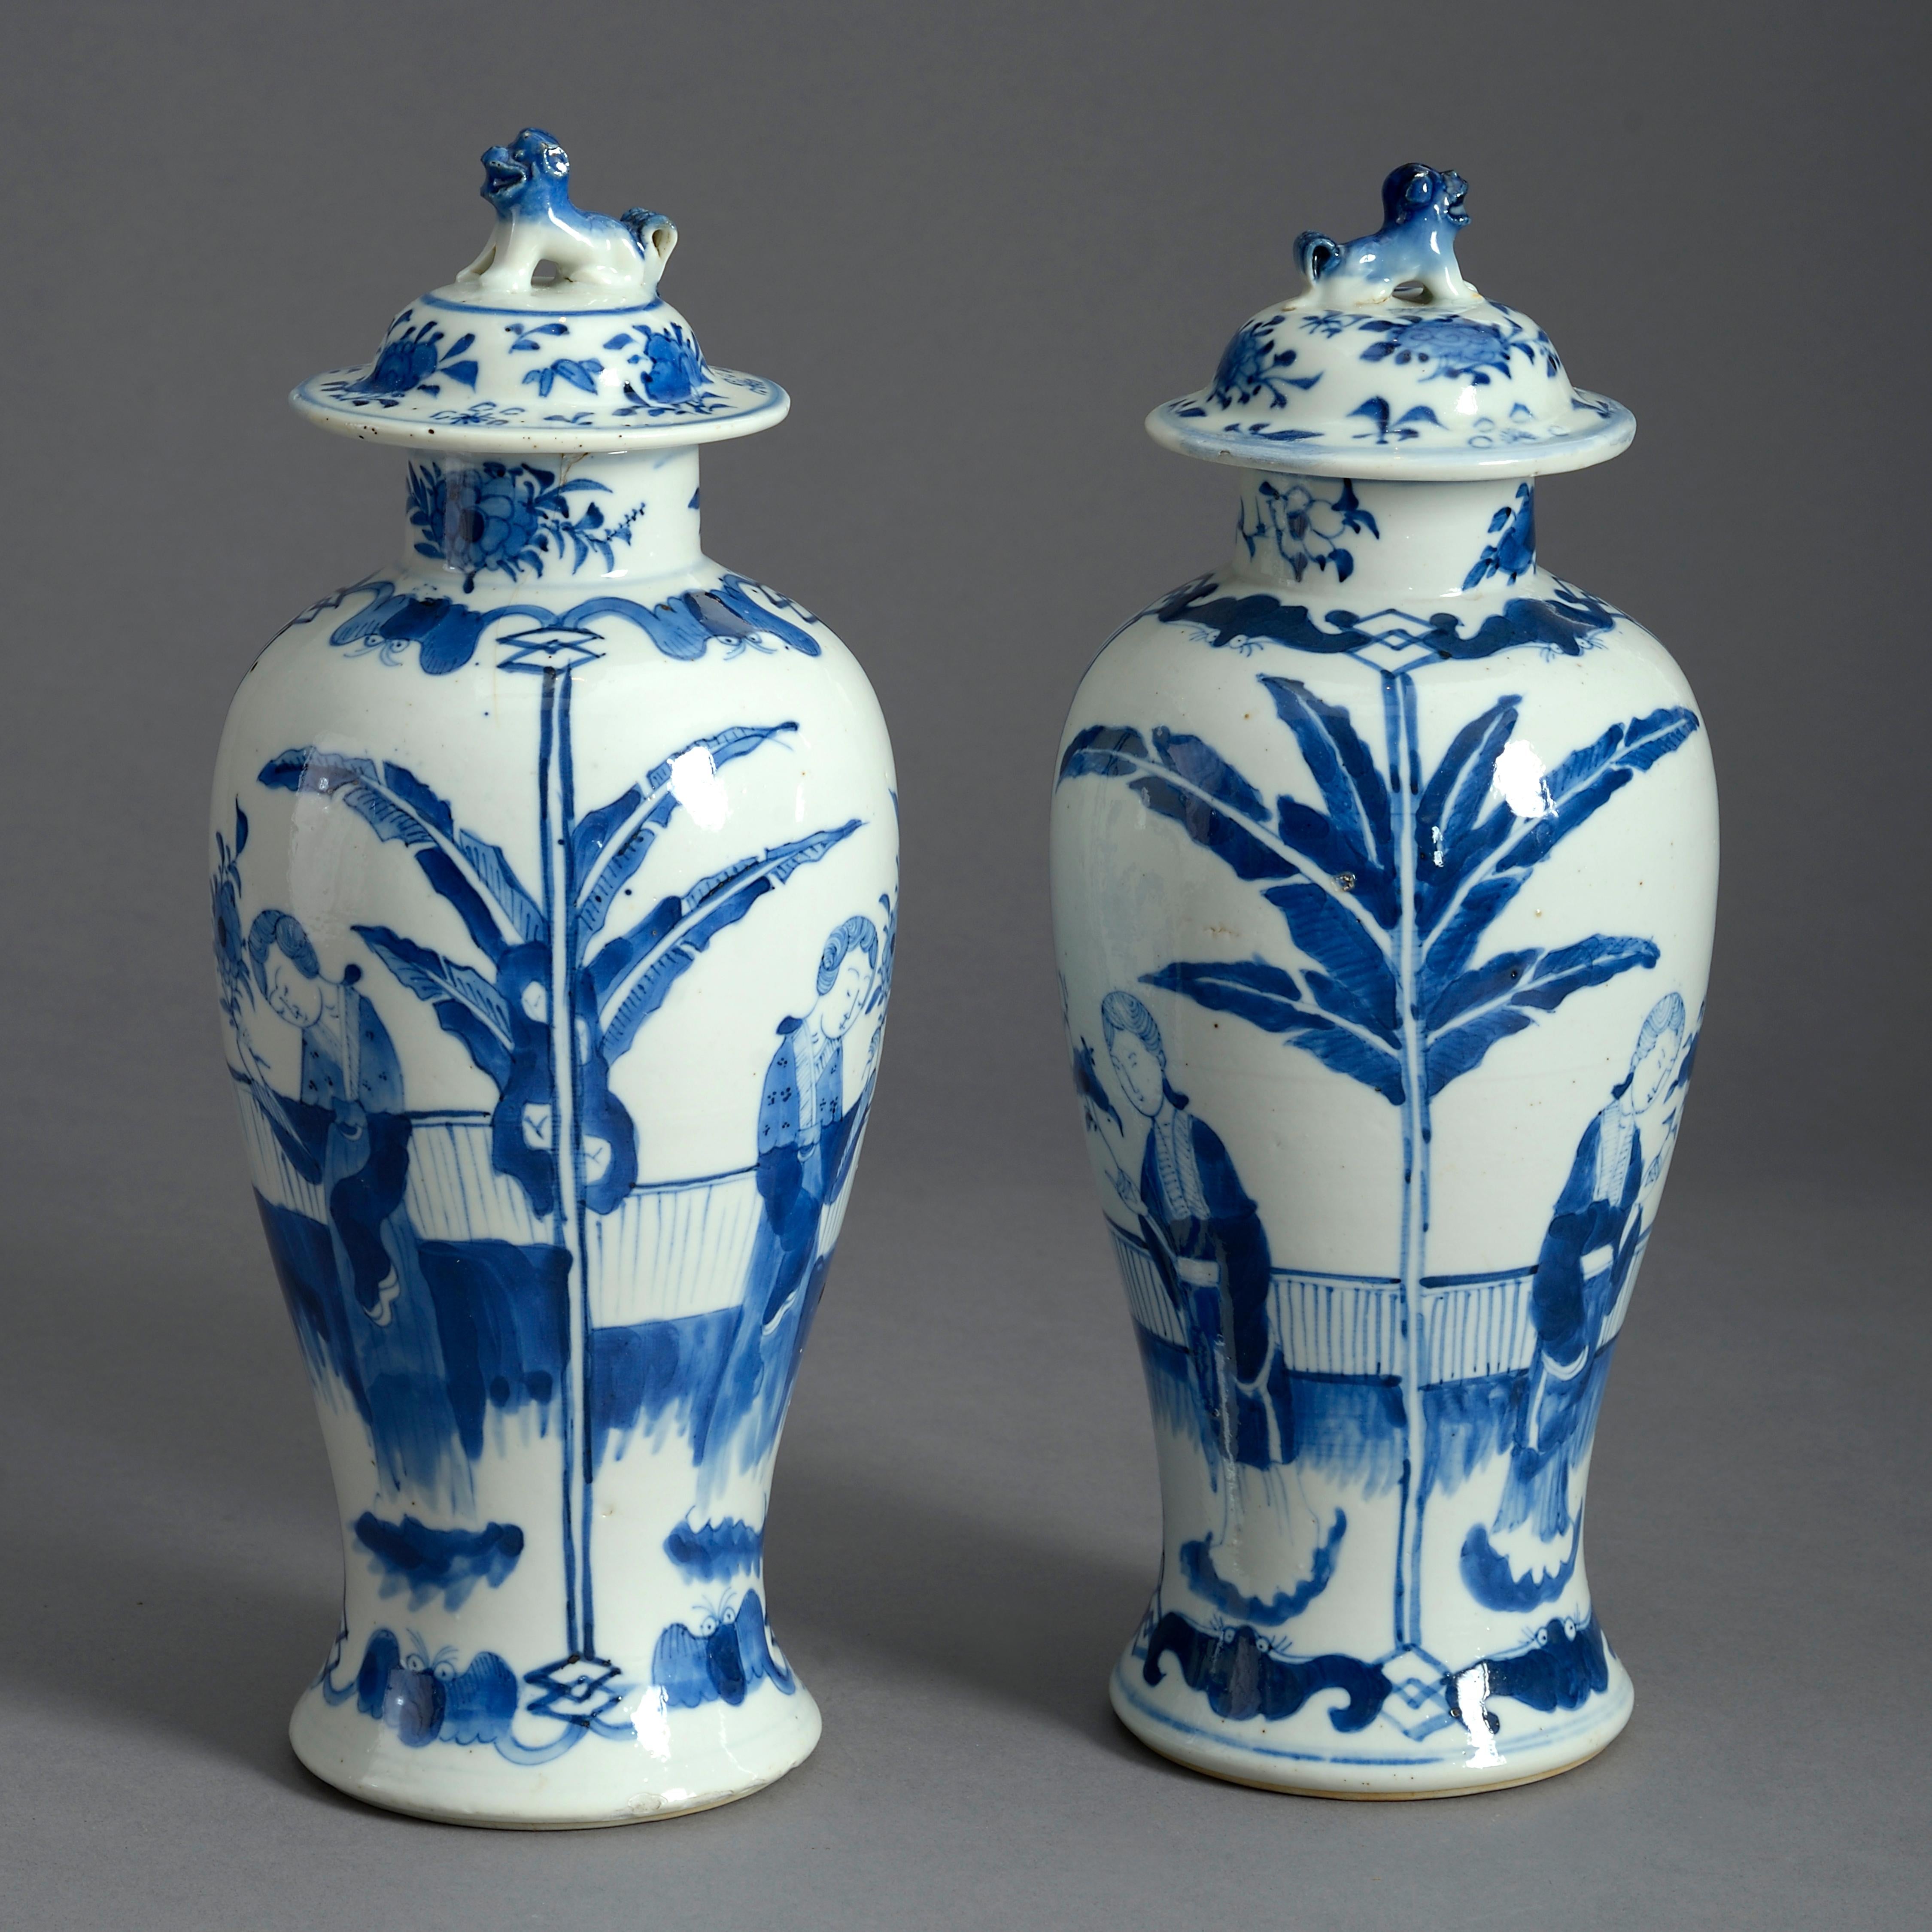 A pair of mid-nineteenth century blue and white glazed porcelain vases of baluster form, the lids surmounted by stylised lions, the bodies decorated with palm trees and court figures. Each with four character marks to the underside.

Qing